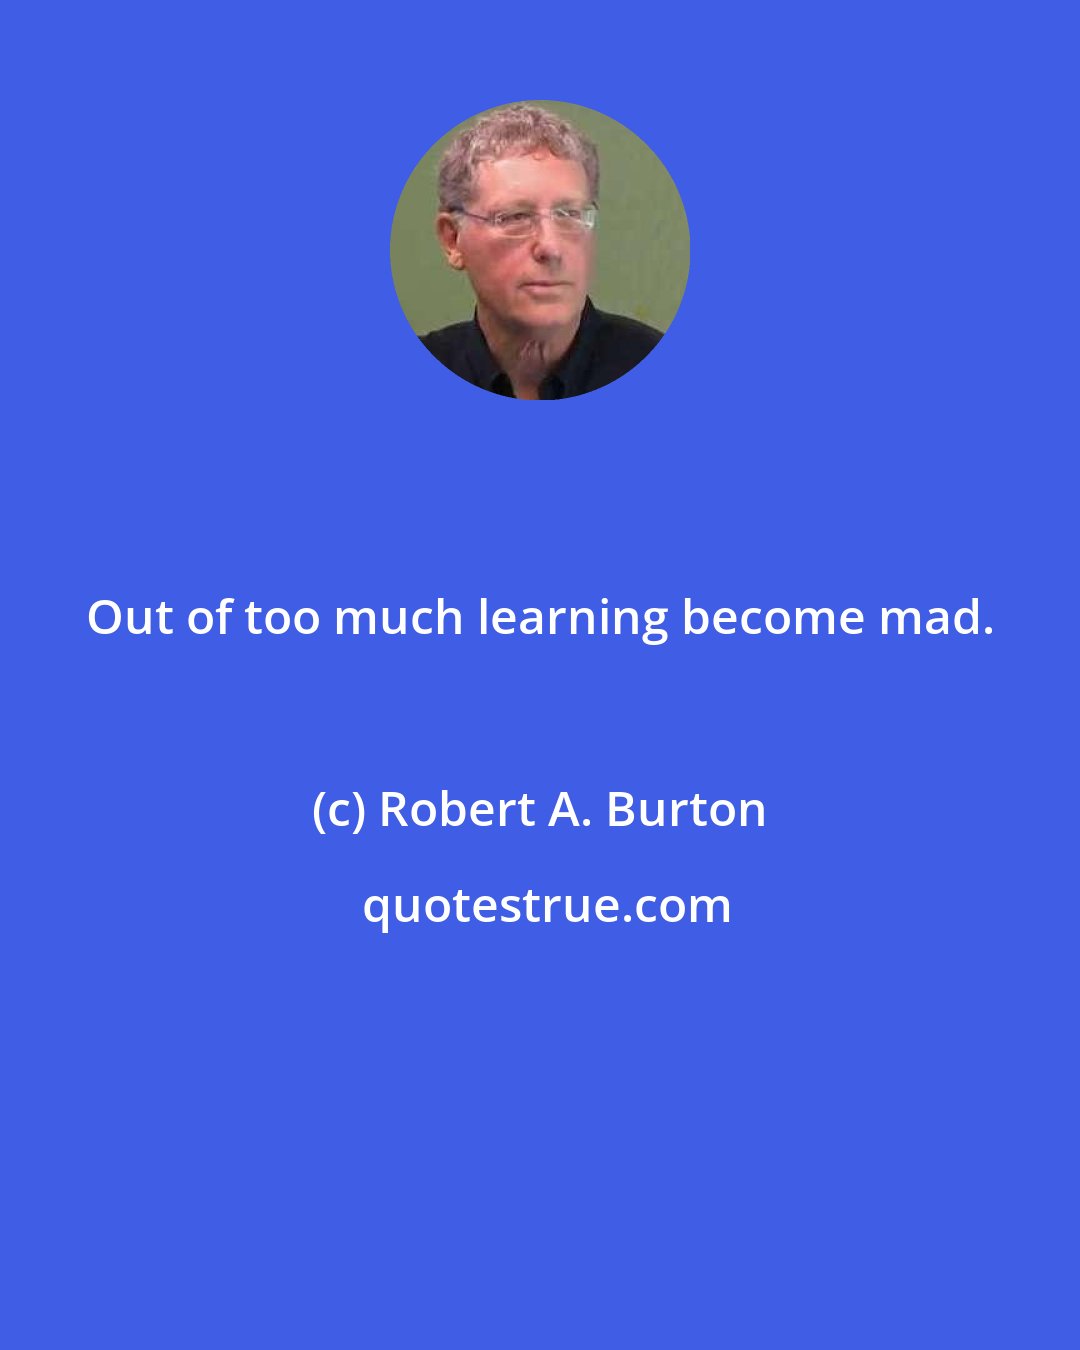 Robert A. Burton: Out of too much learning become mad.